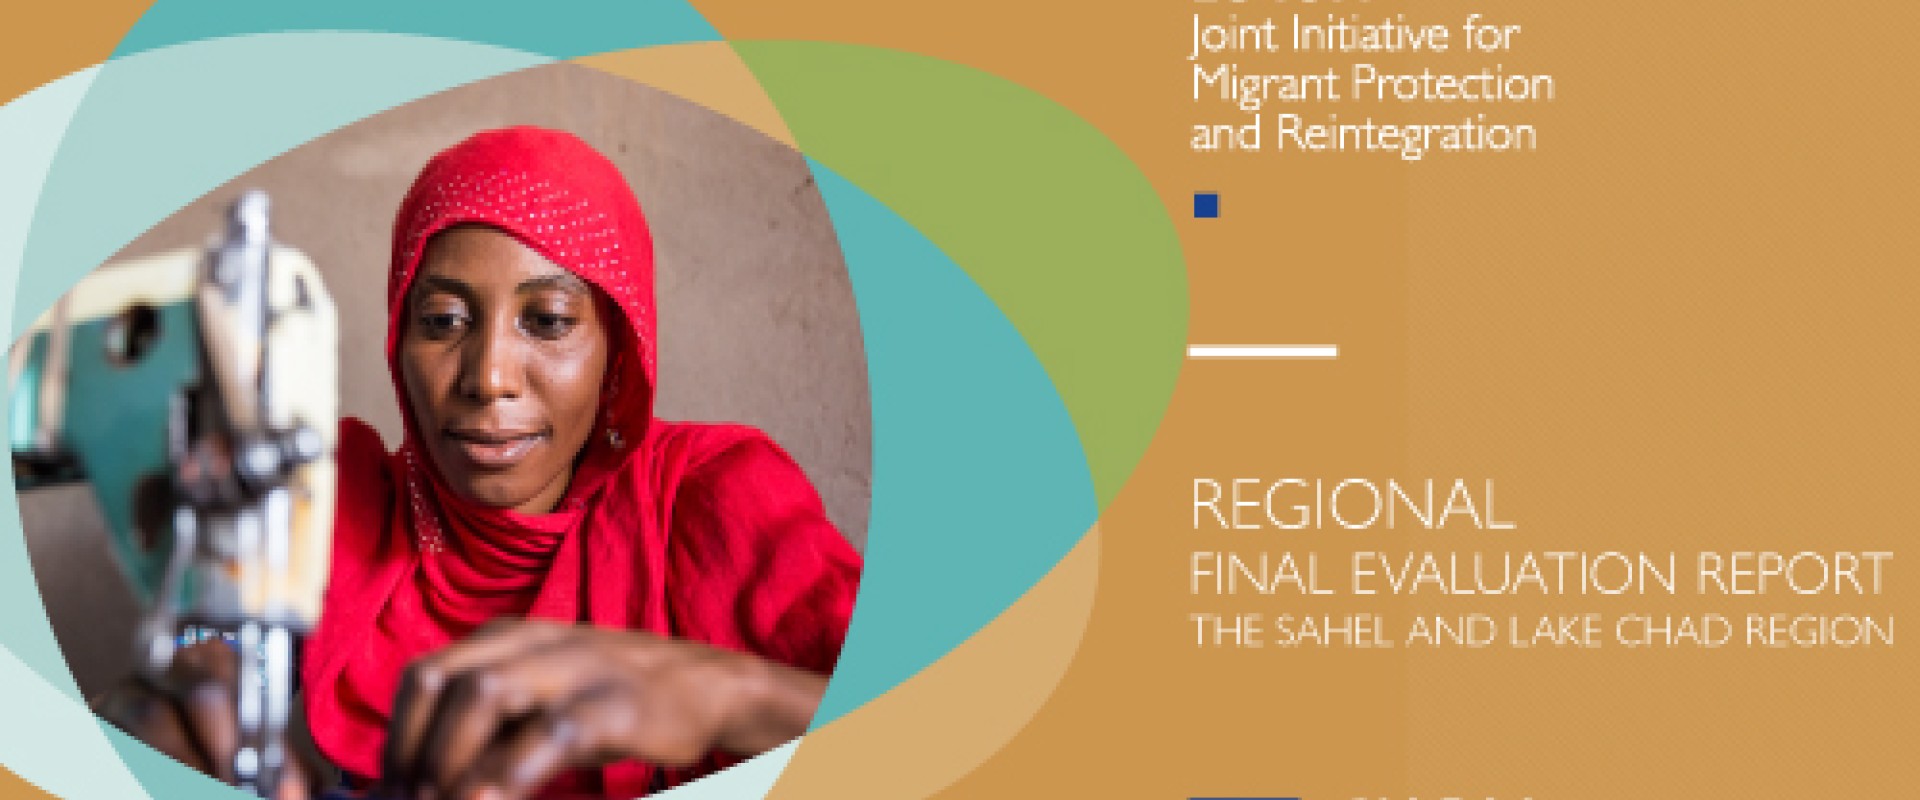 Regional Final Evaluation Report the Sahel and Lake Chad Region